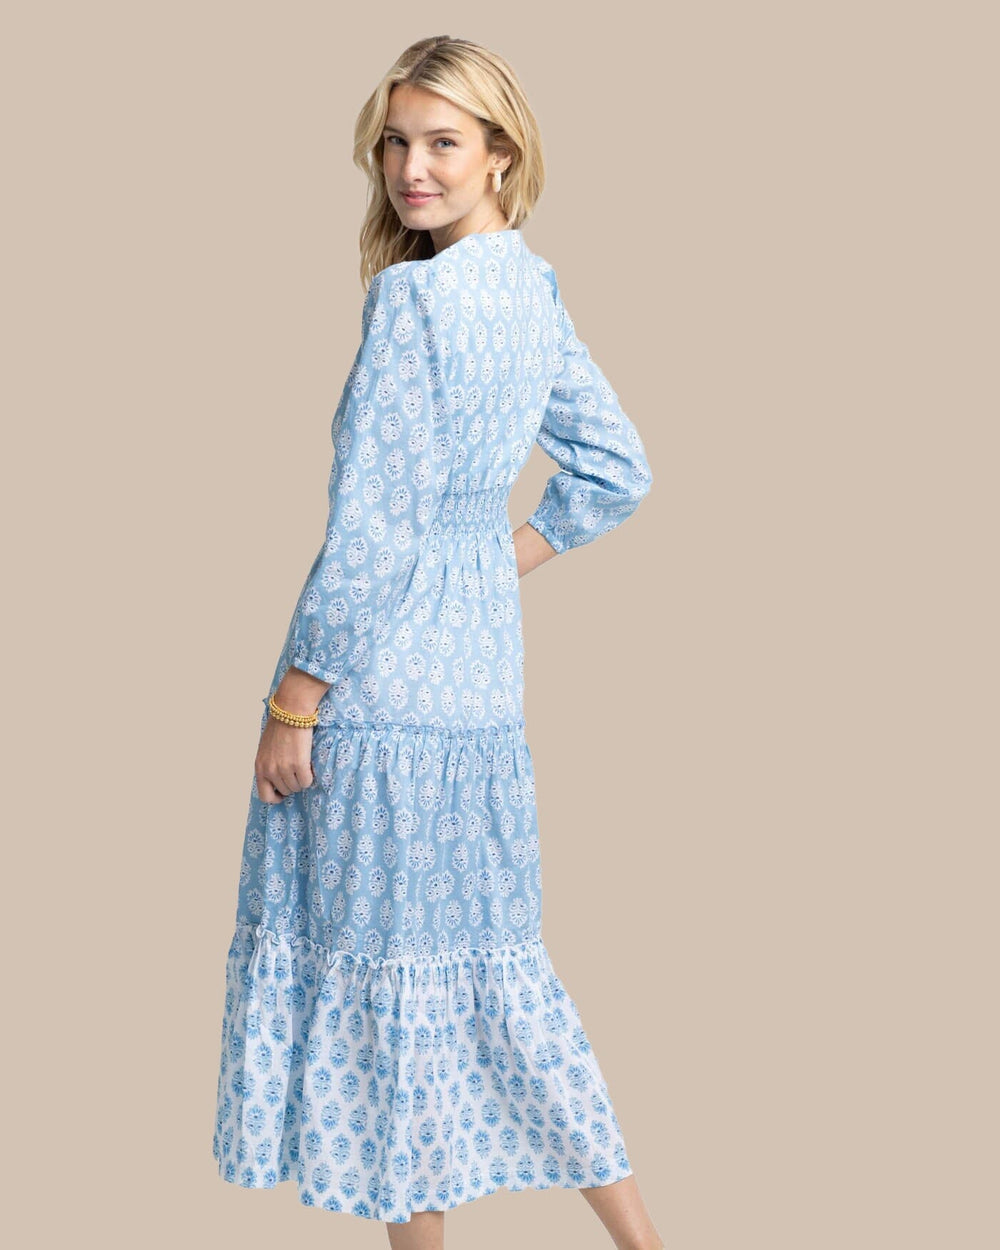 The back view of the Southern Tide Blaire Garden Variety Printed Maxi Dress by Southern Tide - Clearwater Blue